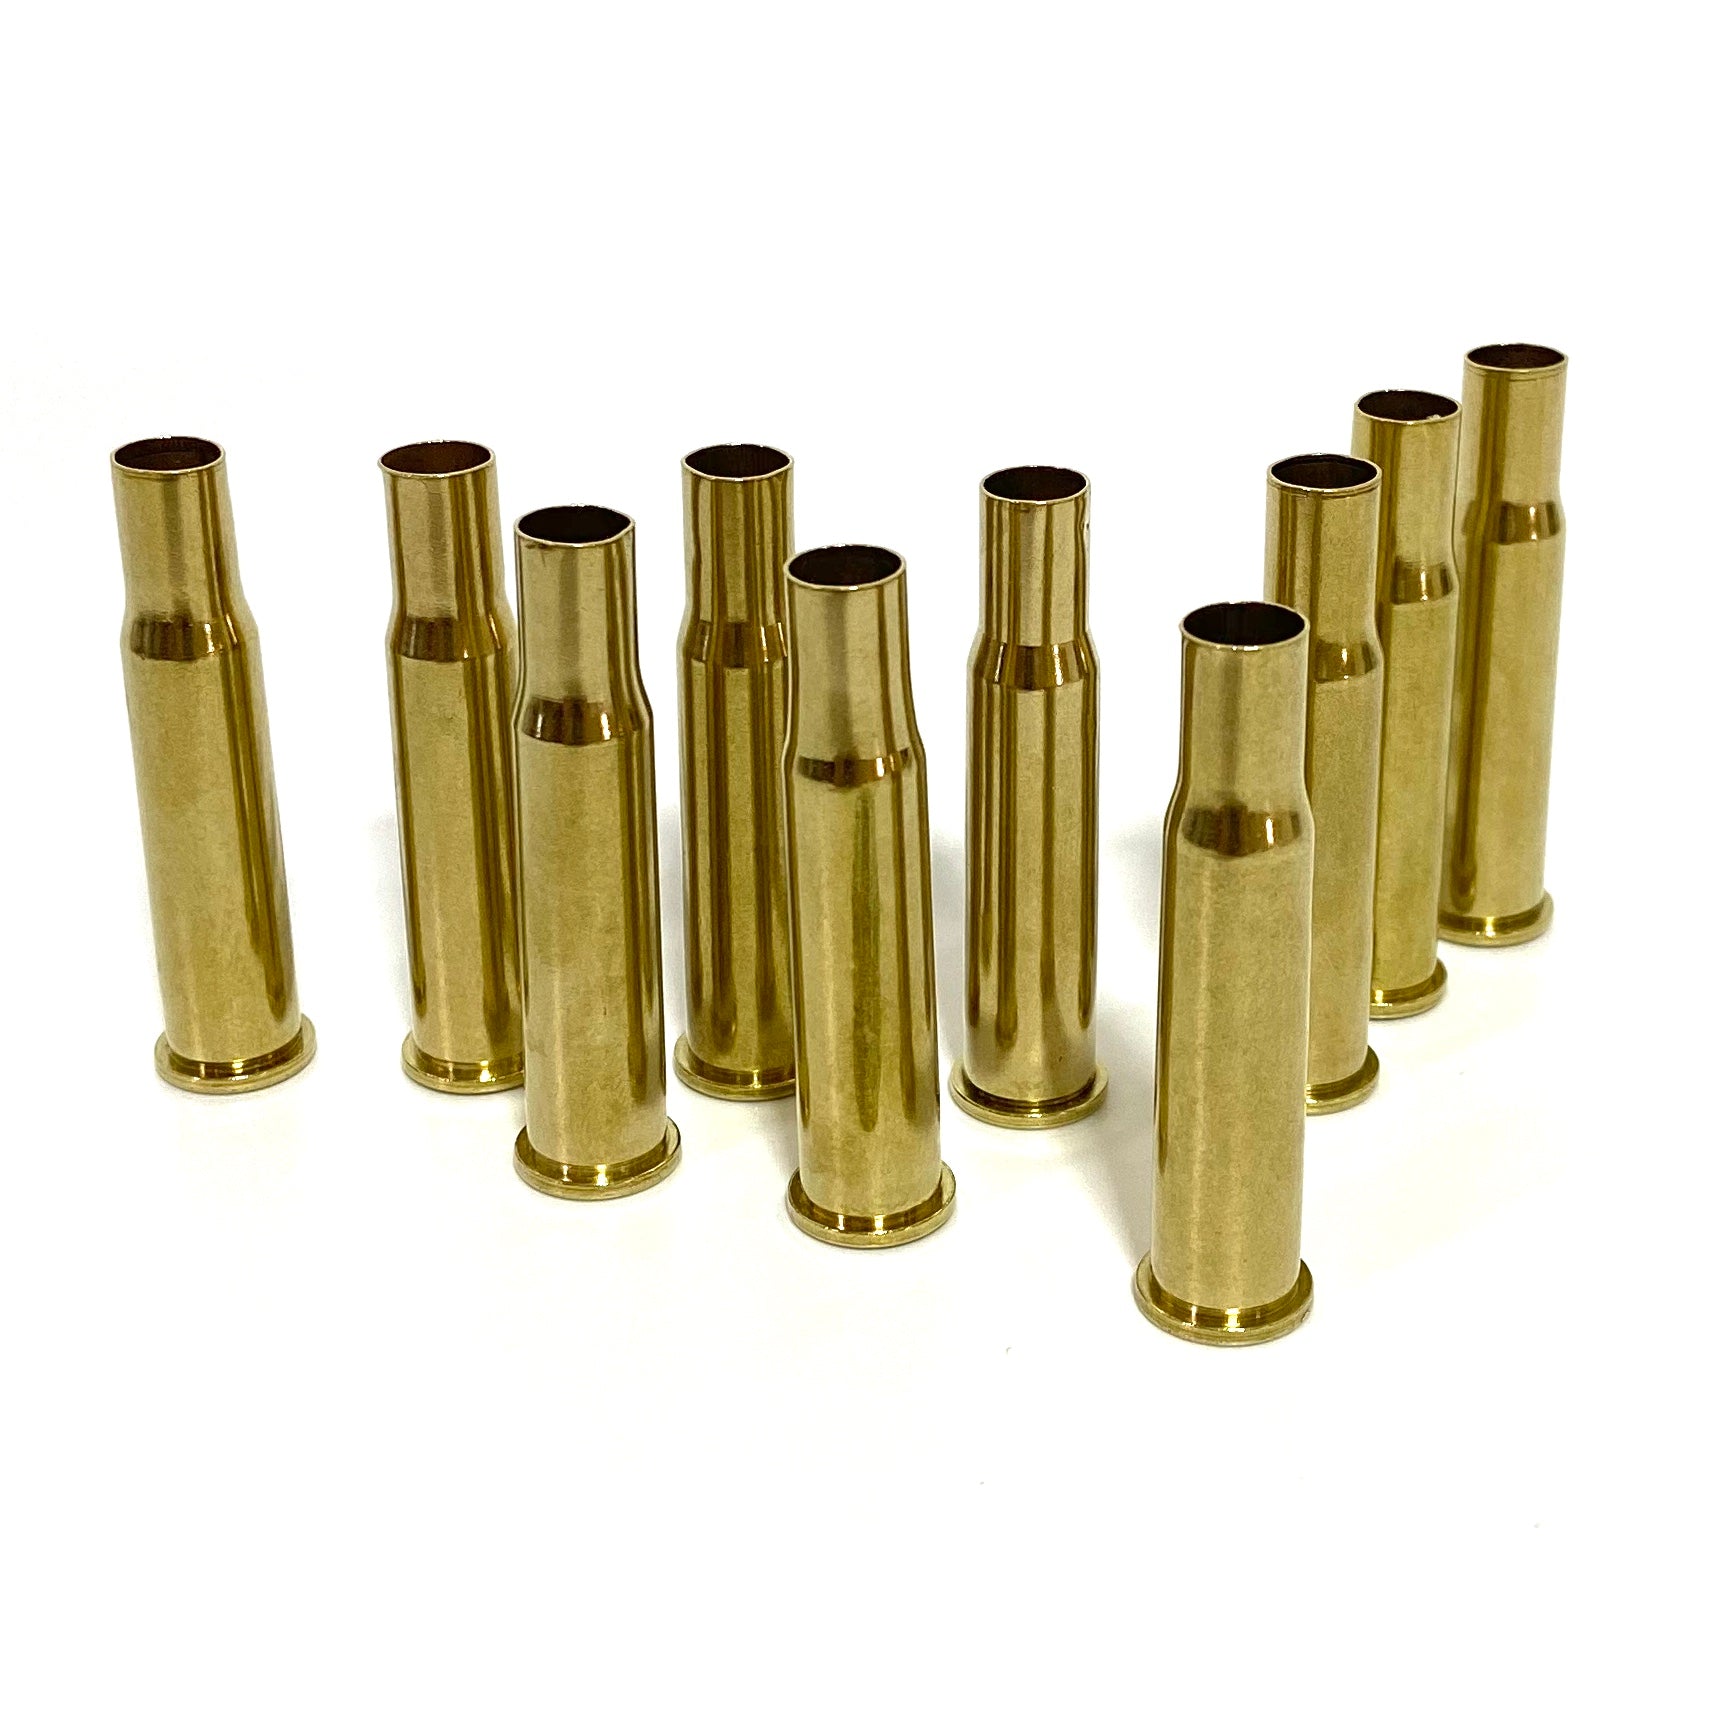 Winchester 30-30 Empty Spent Brass Bullet Casings Polished Used Shells –